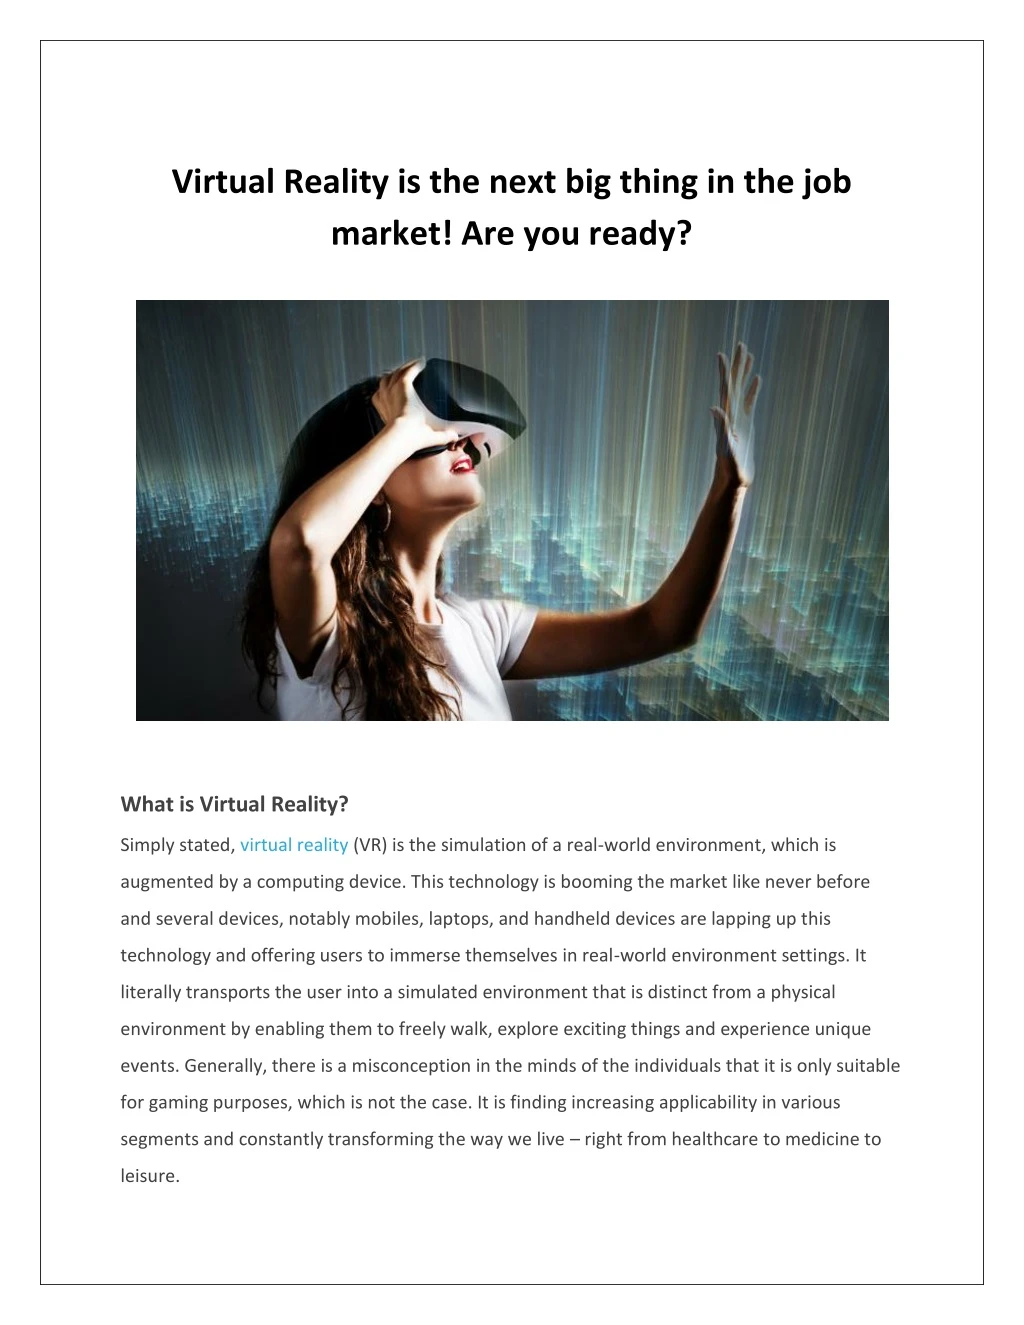 virtual reality is the next big thing